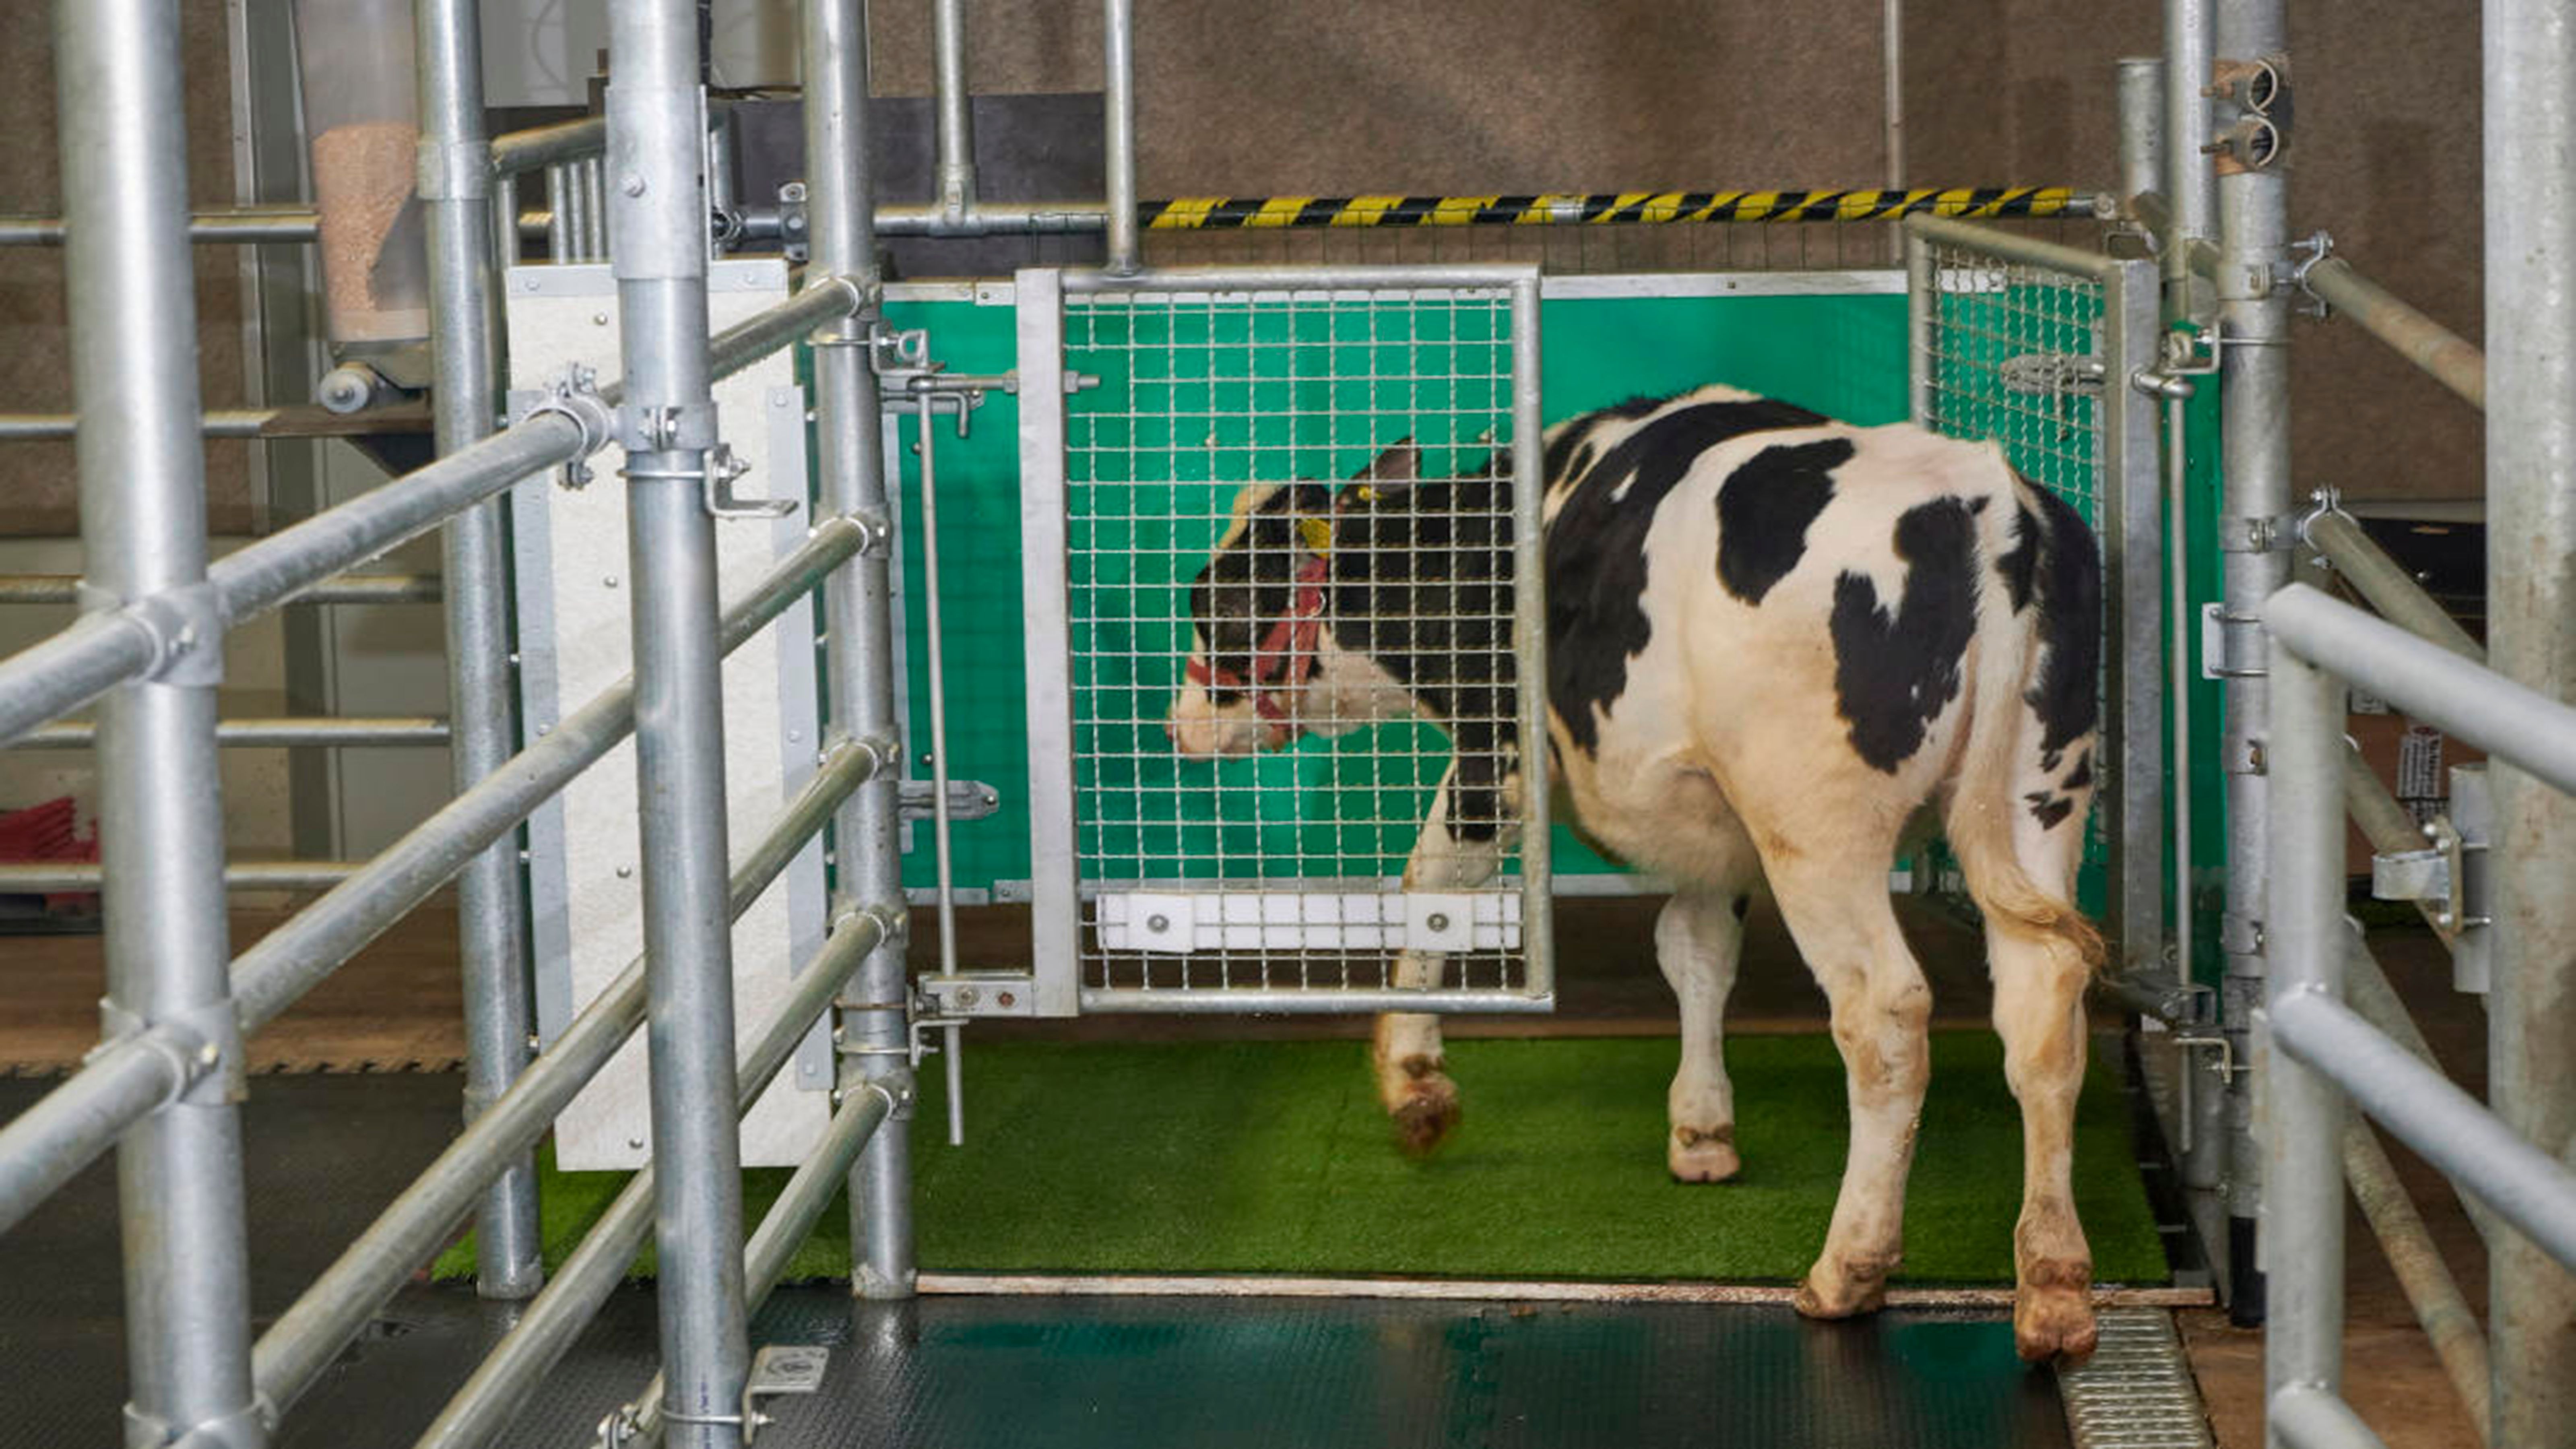 It’s no bull Cows can be potty-trained photo from Yahoo News